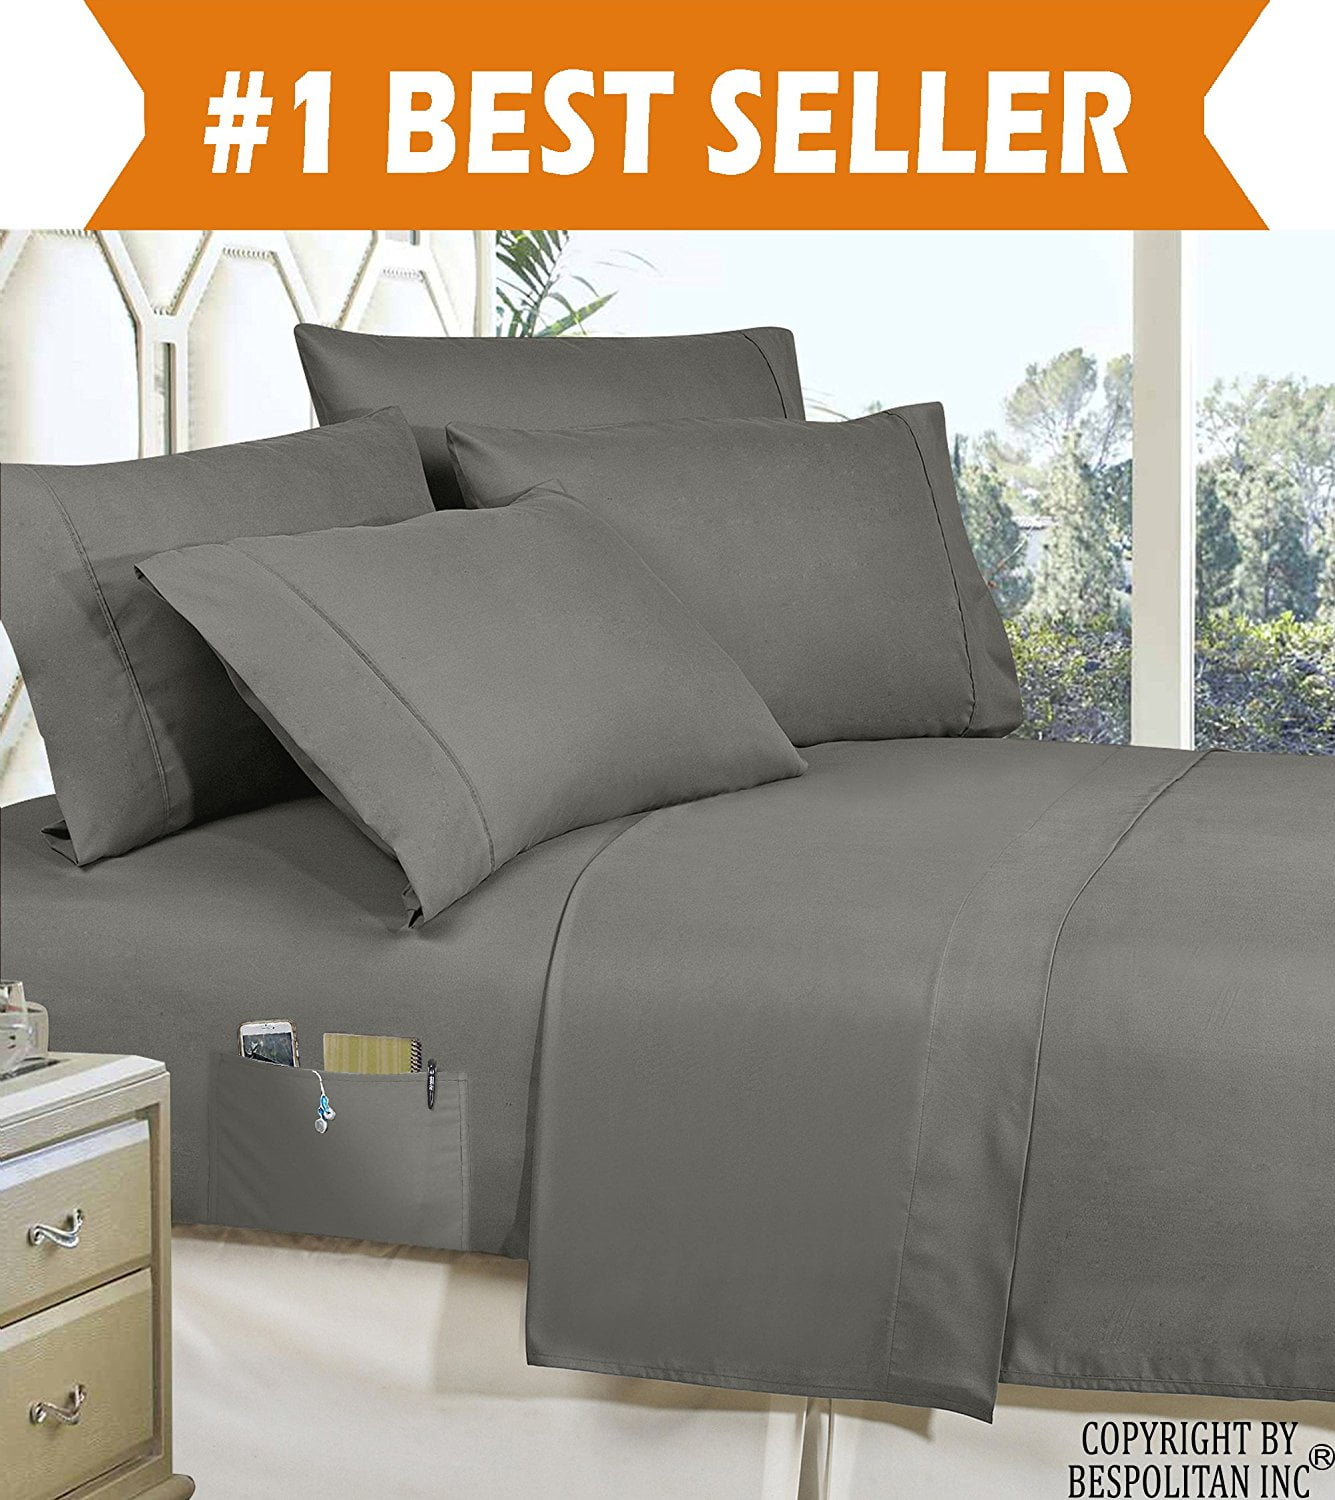 Details about   Us full 1000 tc soft egyptian cotton 5 pc comforter set fitted sheet all show original title 